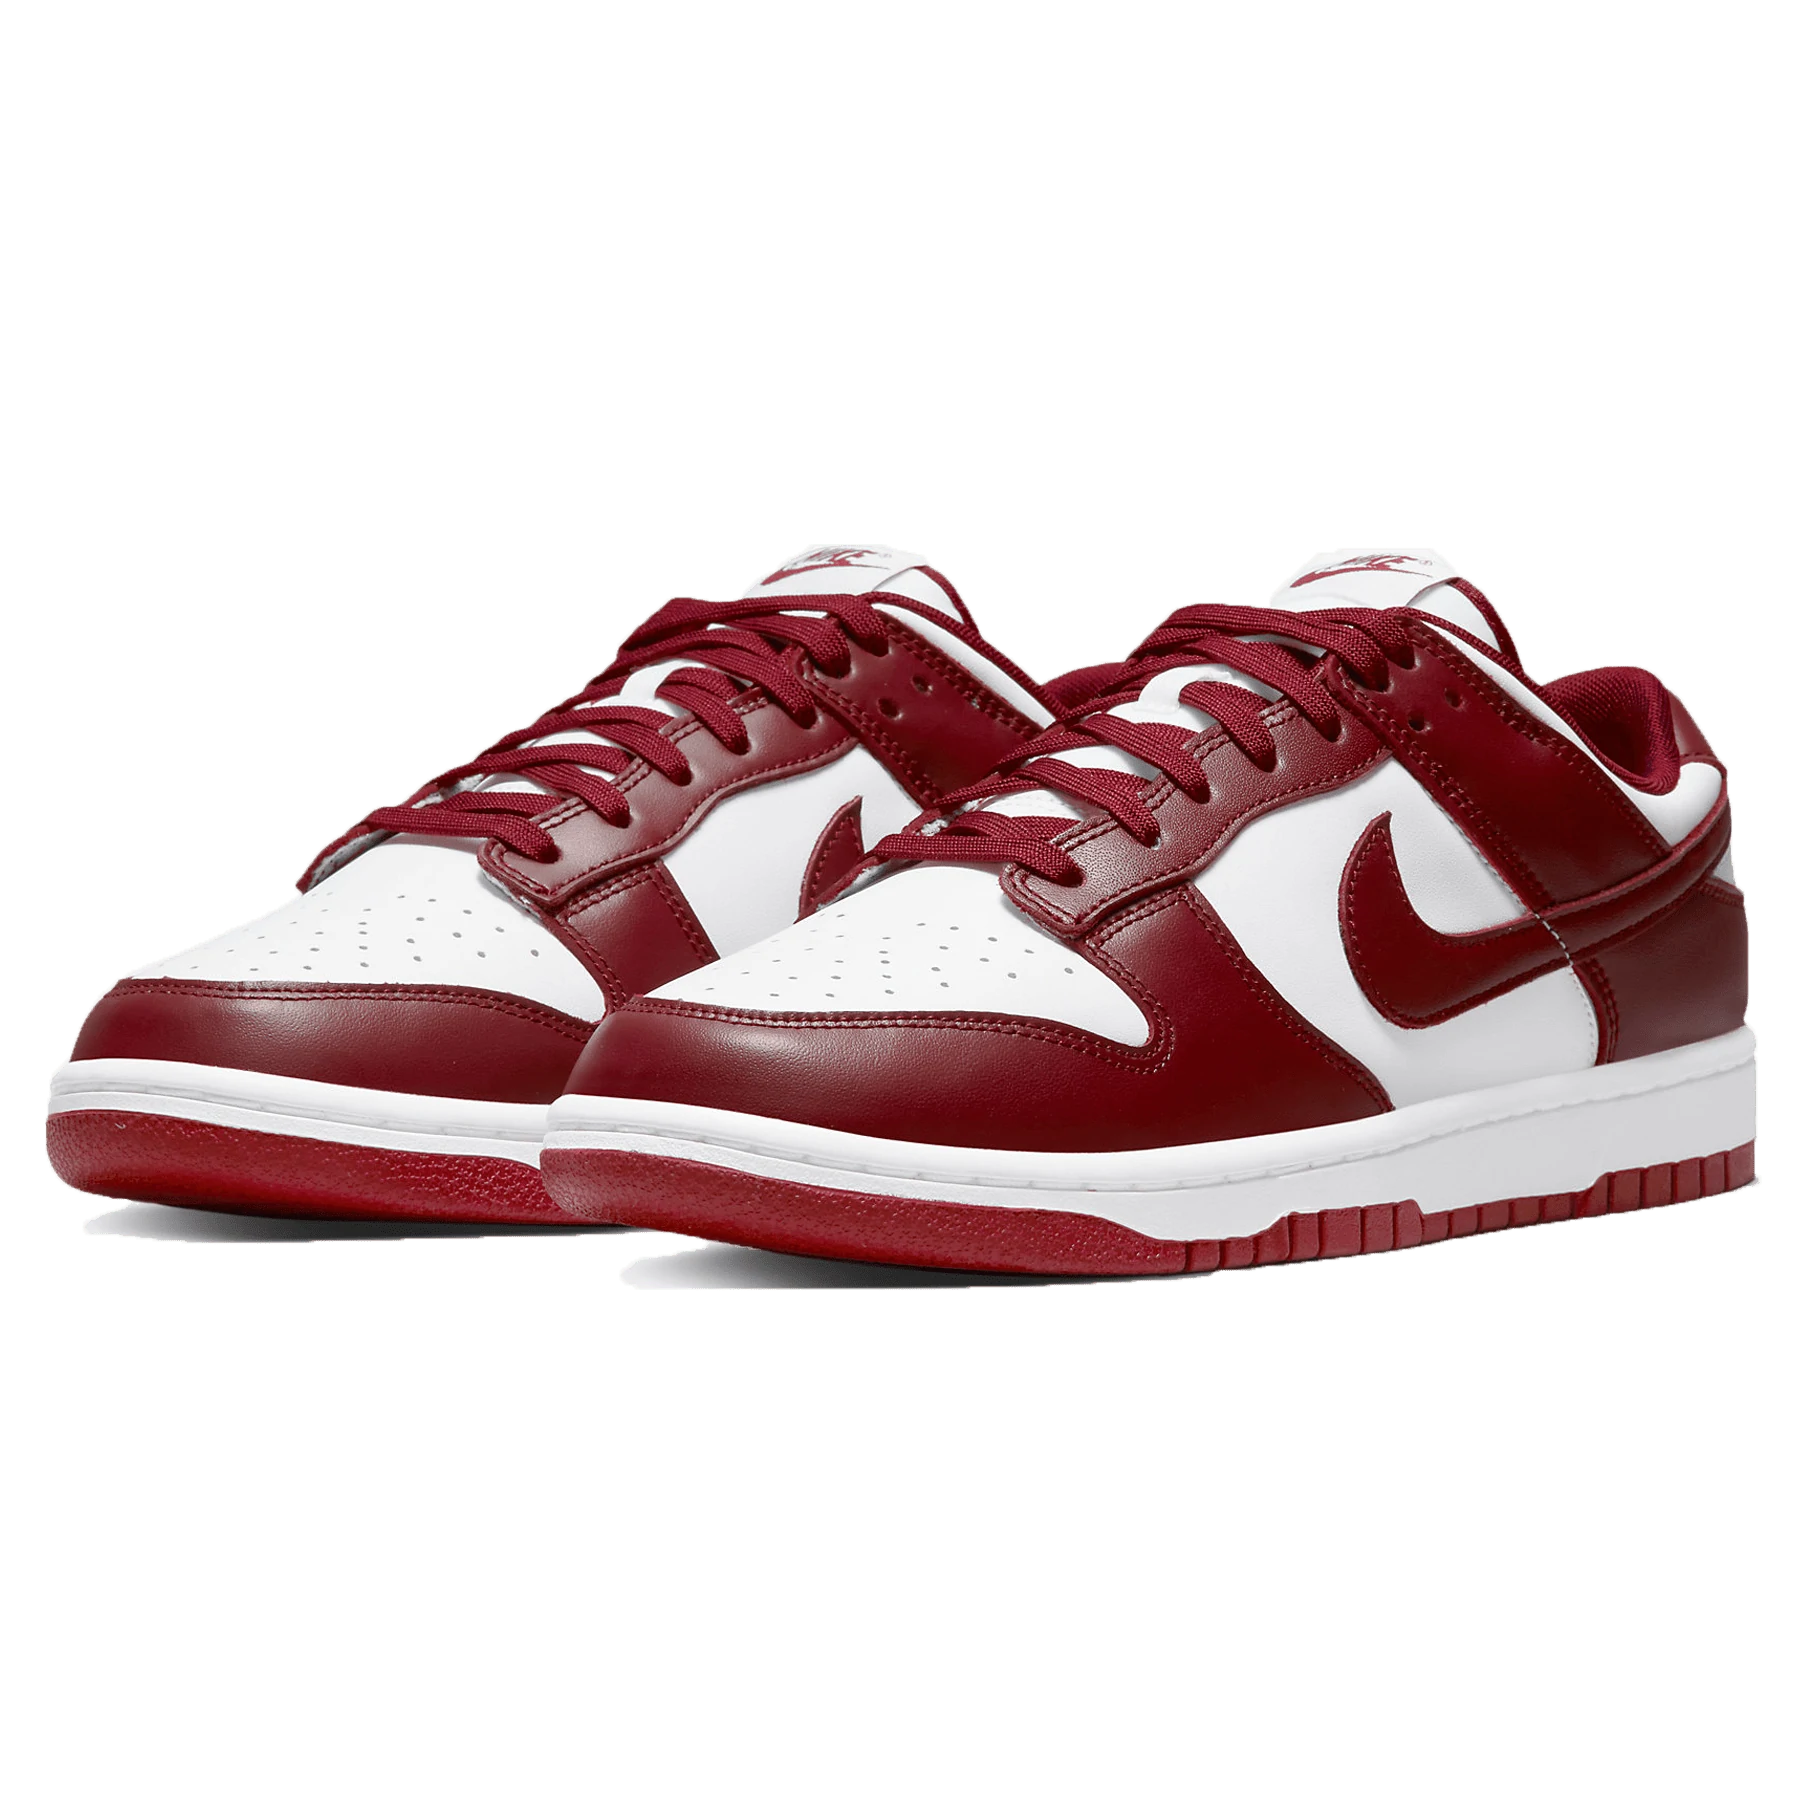 Double Boxed  199.99 Nike Dunk Low Team Red Double Boxed